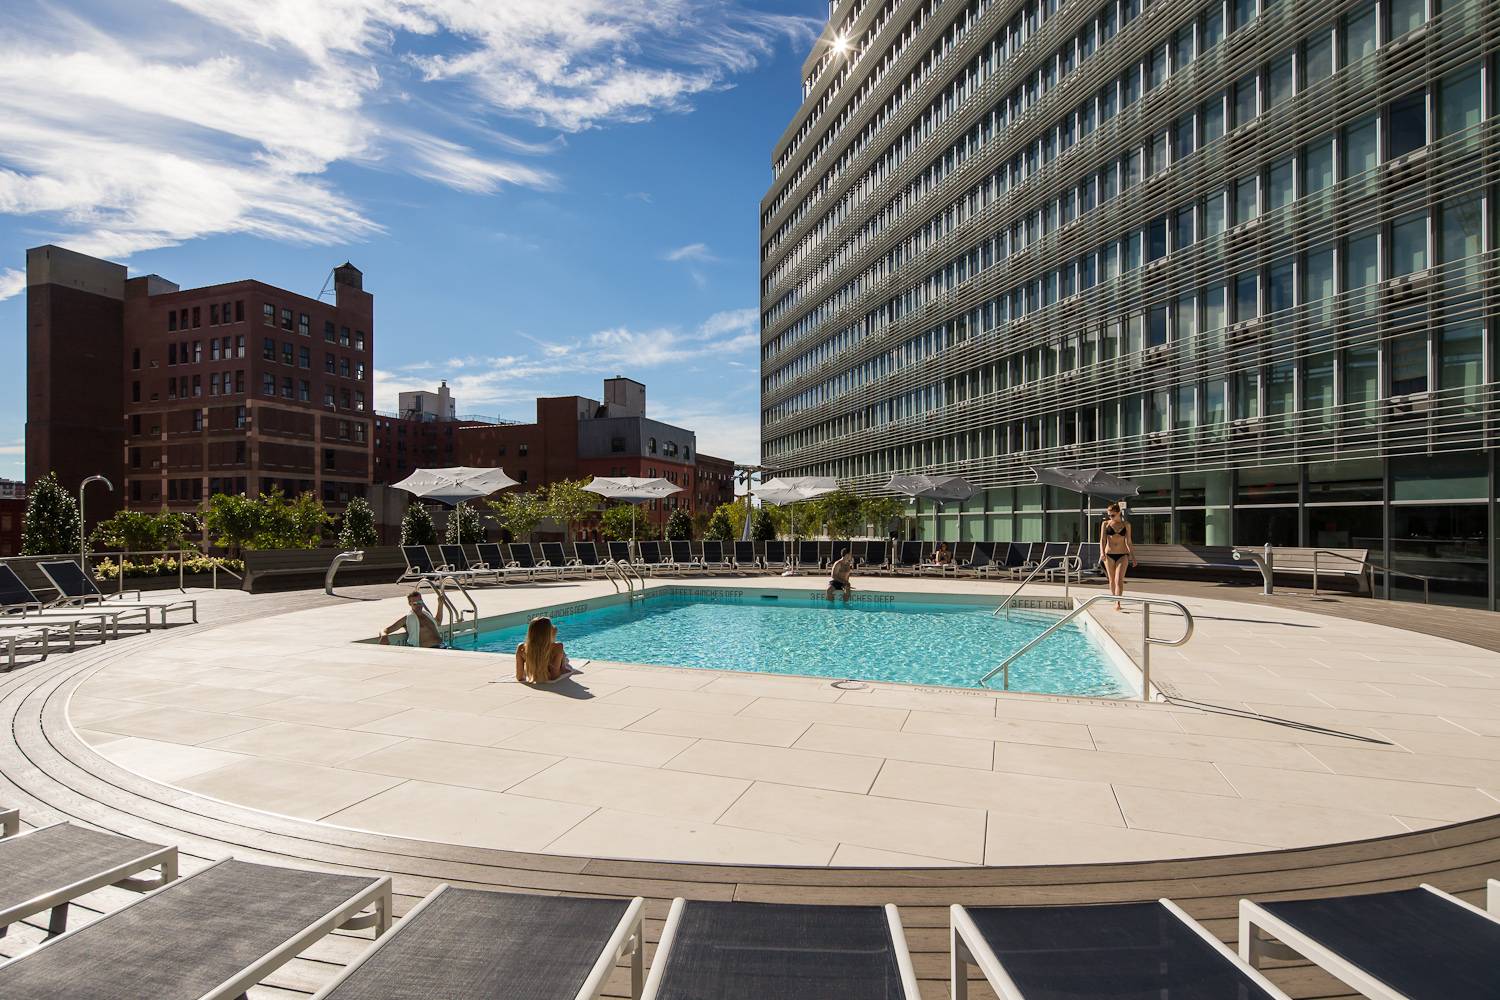 NO FEE!! UNBELIEVABLE 1 BED/ 1 BATH!! OUTDOOR POOL! STATE OF THE ART GYM & FITNESS CLASSES! FLOOR TO CEILING WINDOWS! HELL’S KITCHEN!!